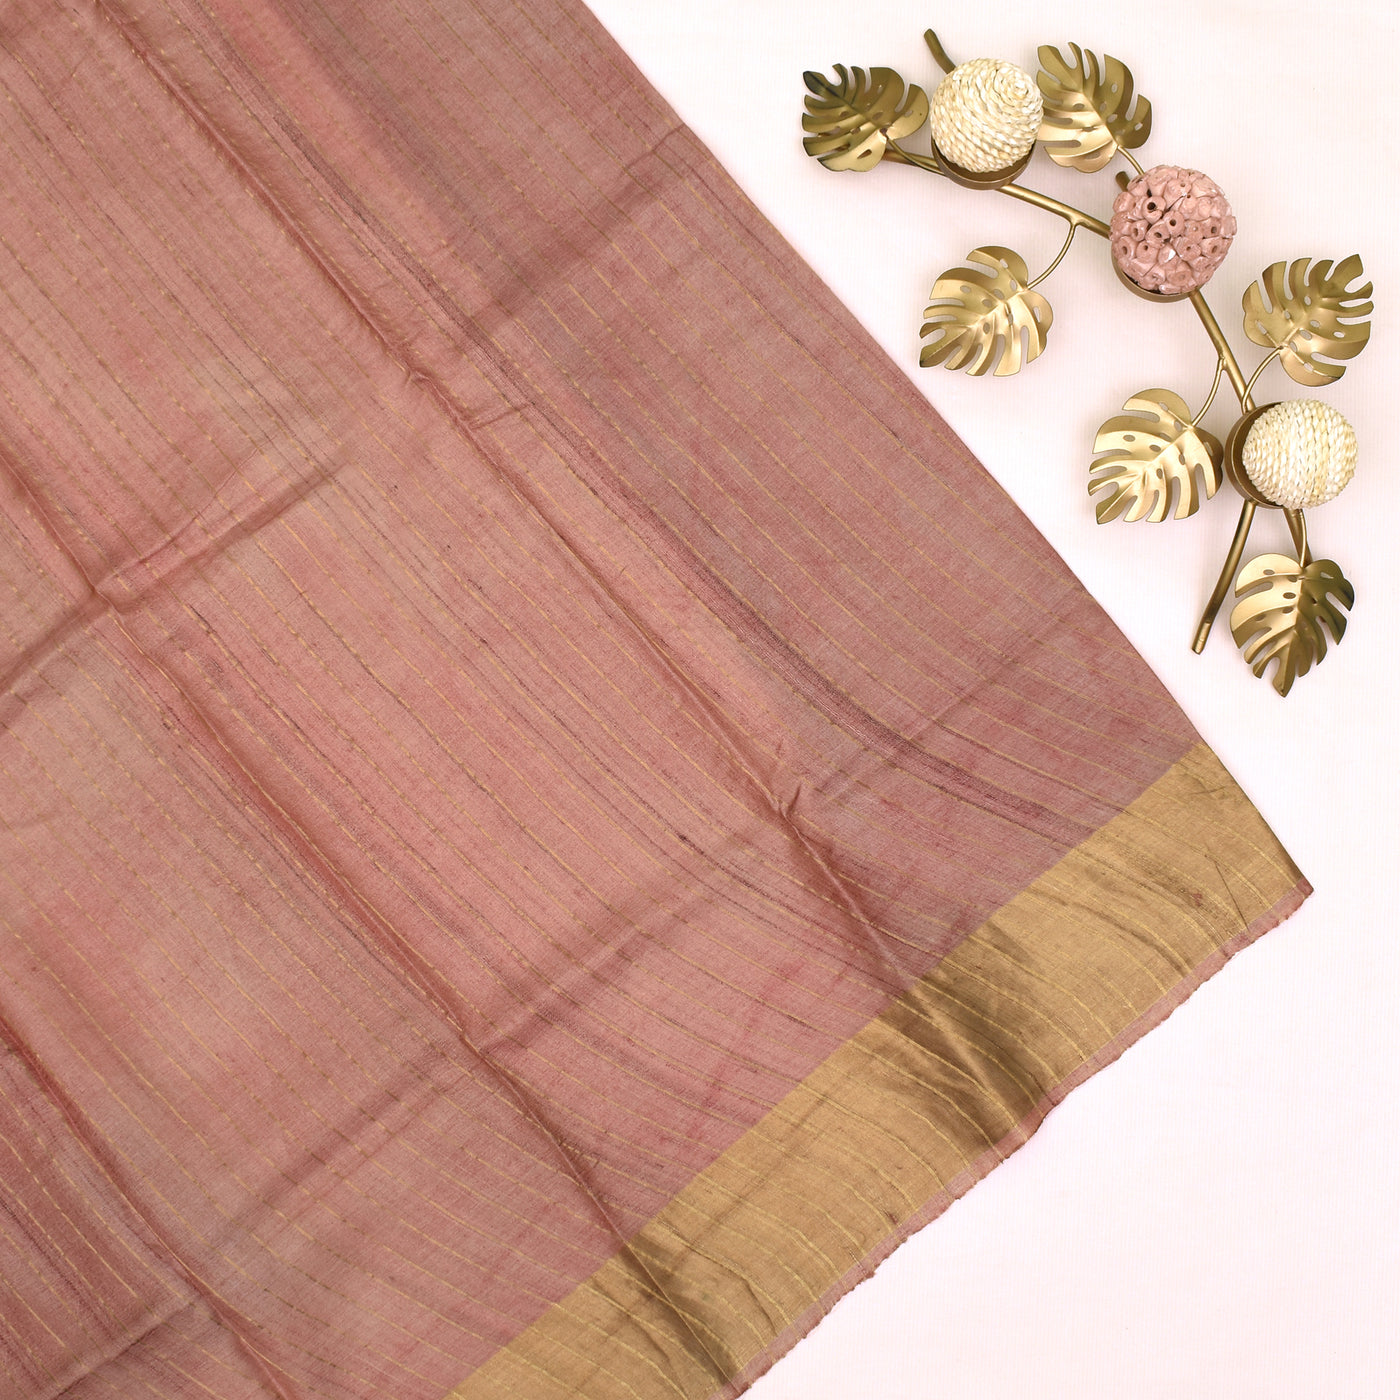 Off White Tussar Printed Saree with Golden Tissue Border in the blouse